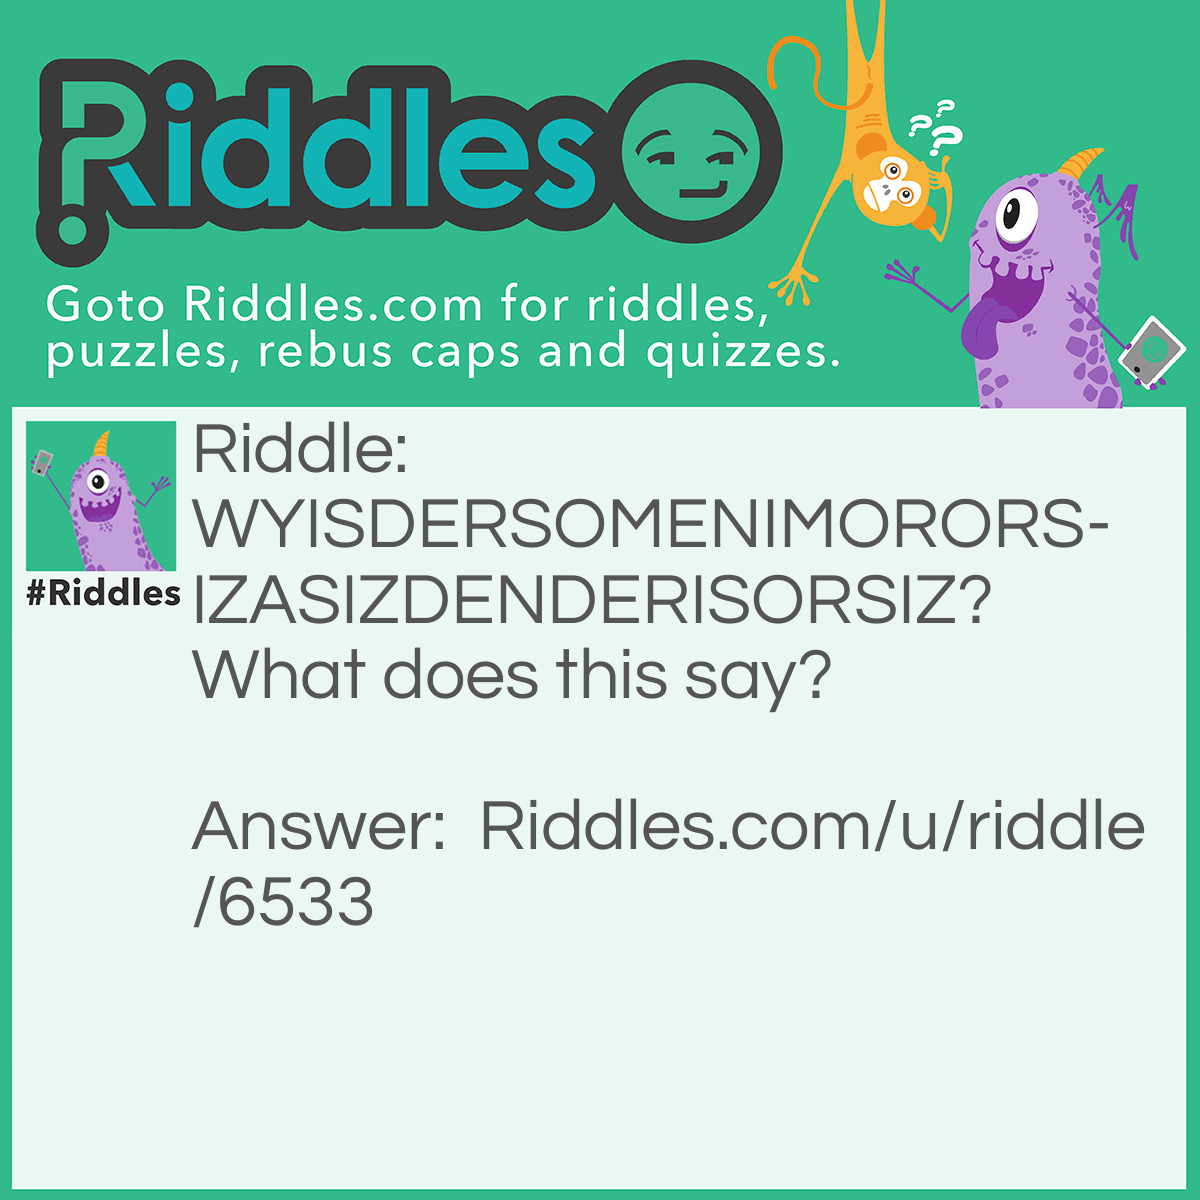 Riddle: <span class="small_mobile">WYISDERSOMENIMORORSIZASIZDENDERISORSIZ?</span> What does this say? Answer: Why is there so many more horses asses than there is horses?